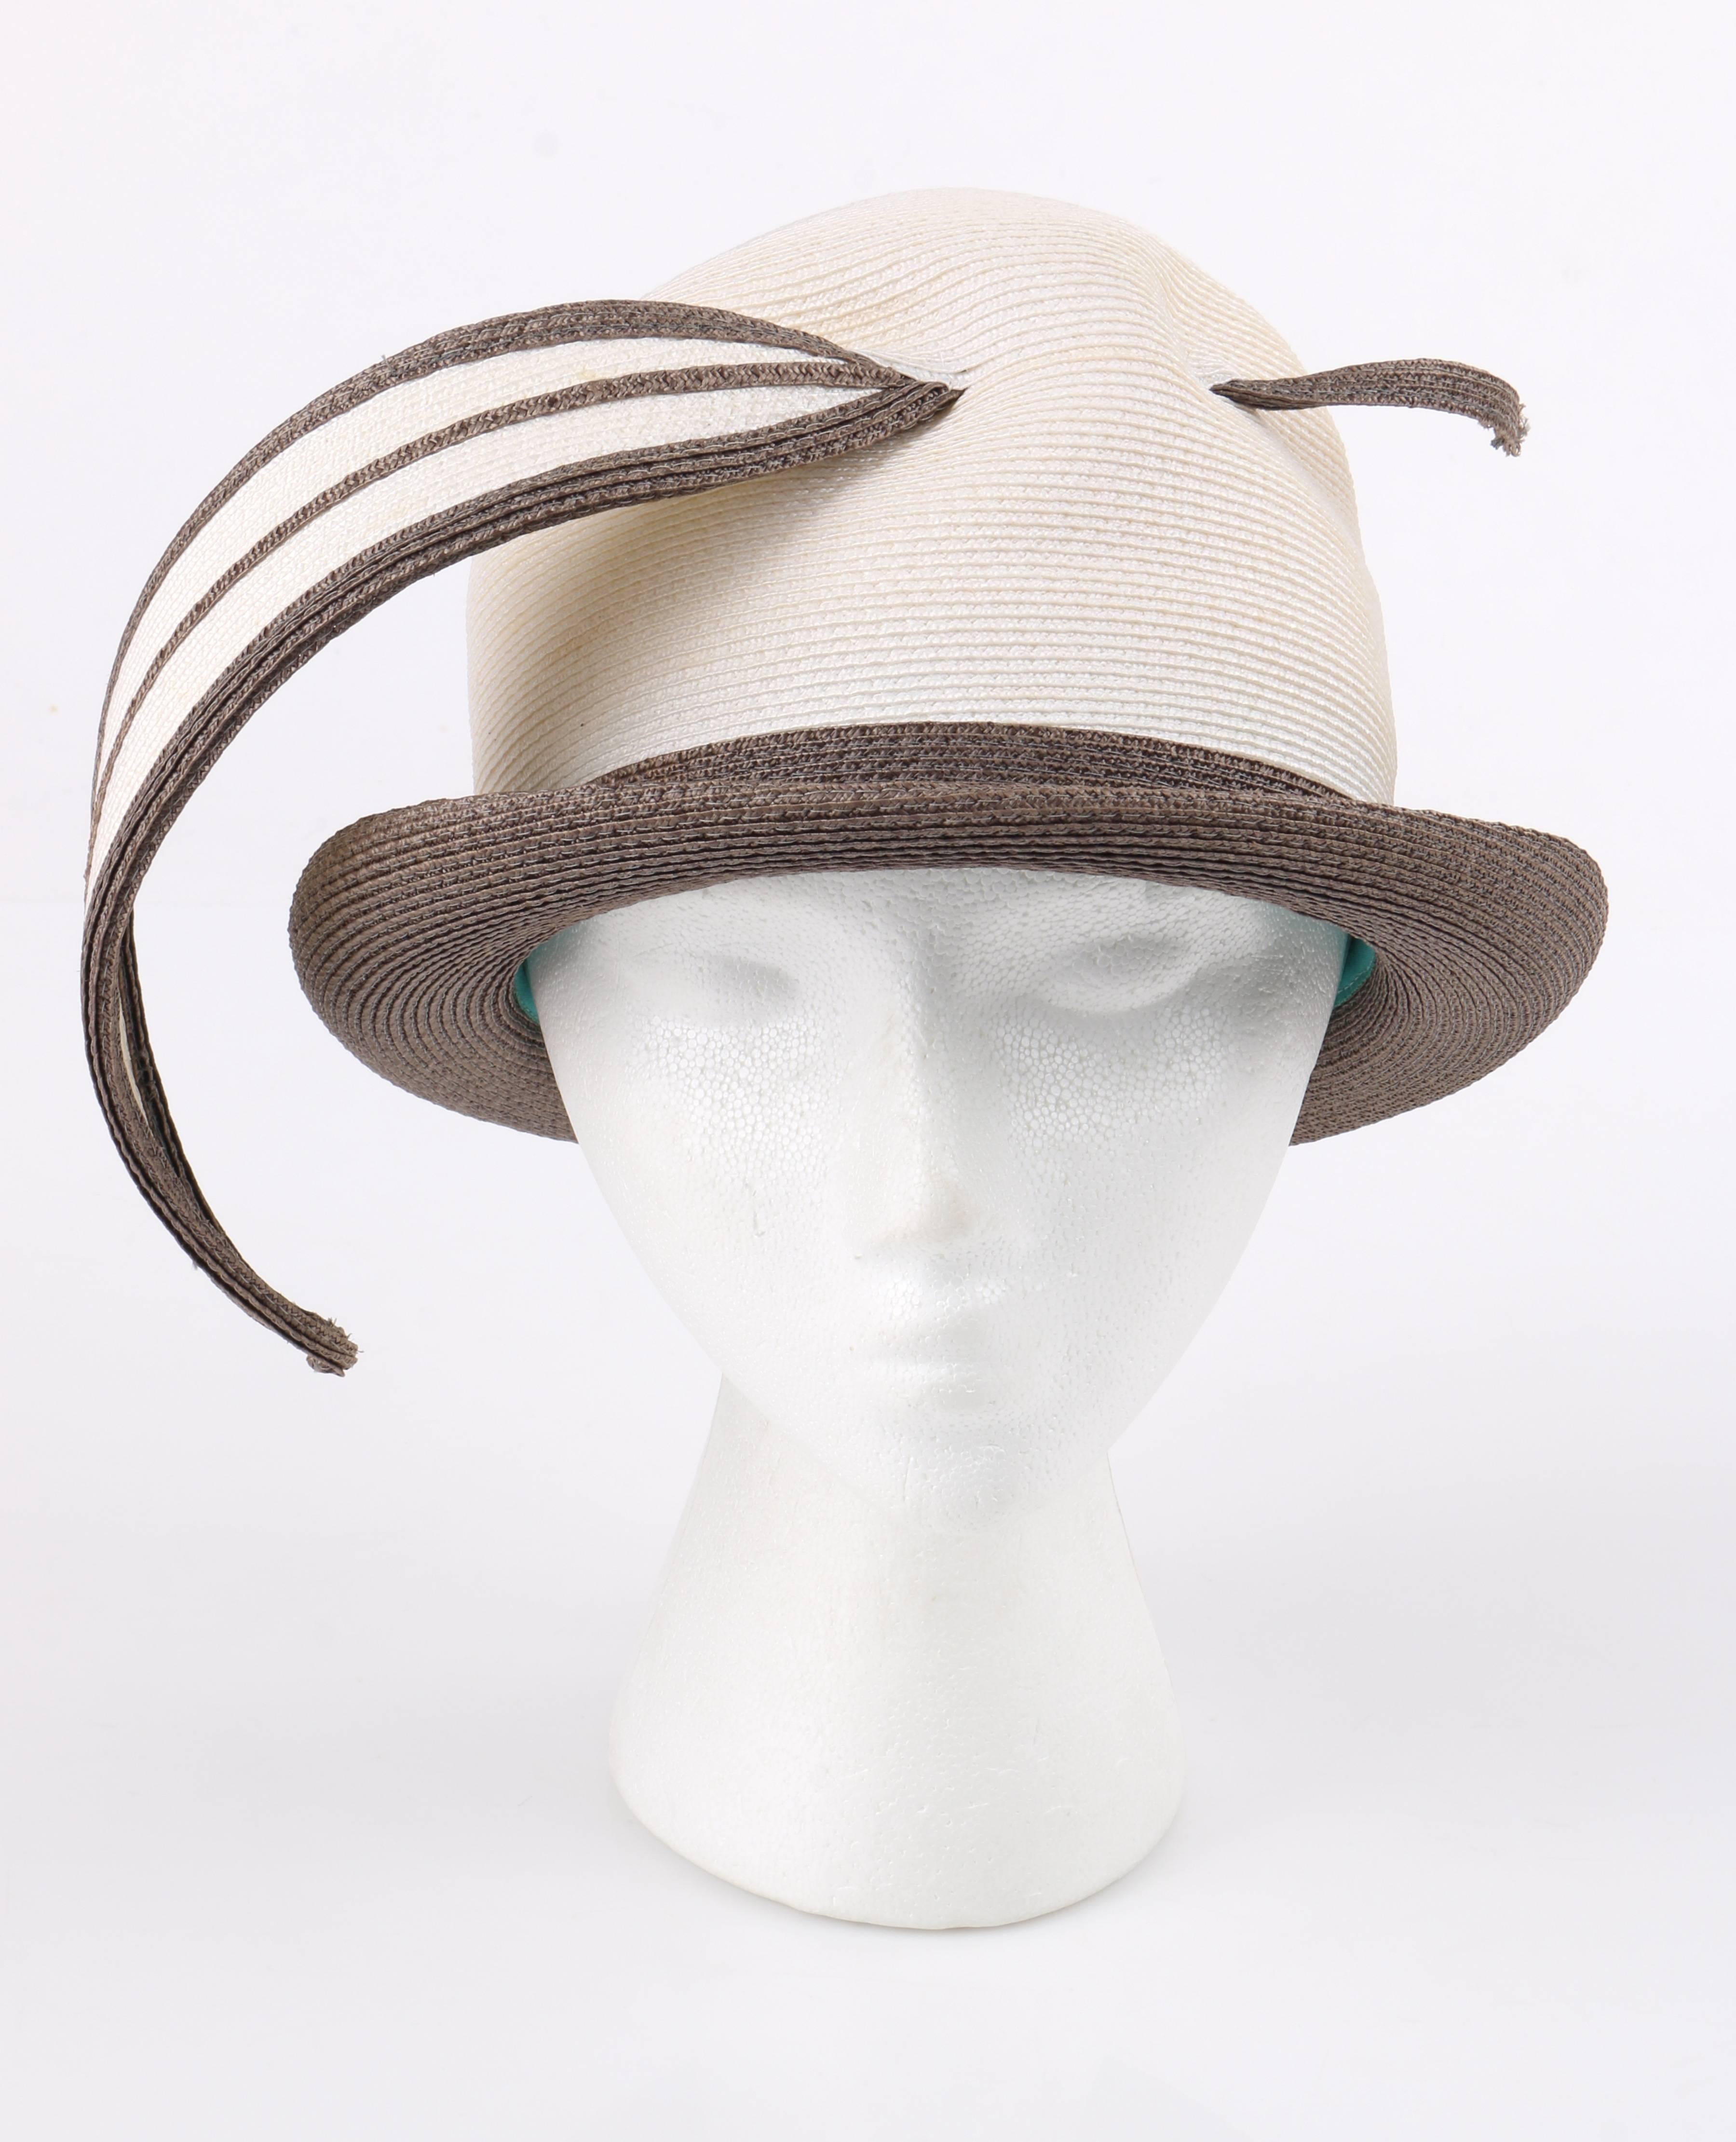 Vintage Yves Saint Laurent YSL c.1965 - 67 off white and taupe straw sculptural leaf cloche hat. White straw bell shaped crown. Taupe rolled brim and hat band. Large sculptural leaf woven through front of crown. Teal blue grosgrain ribbon along